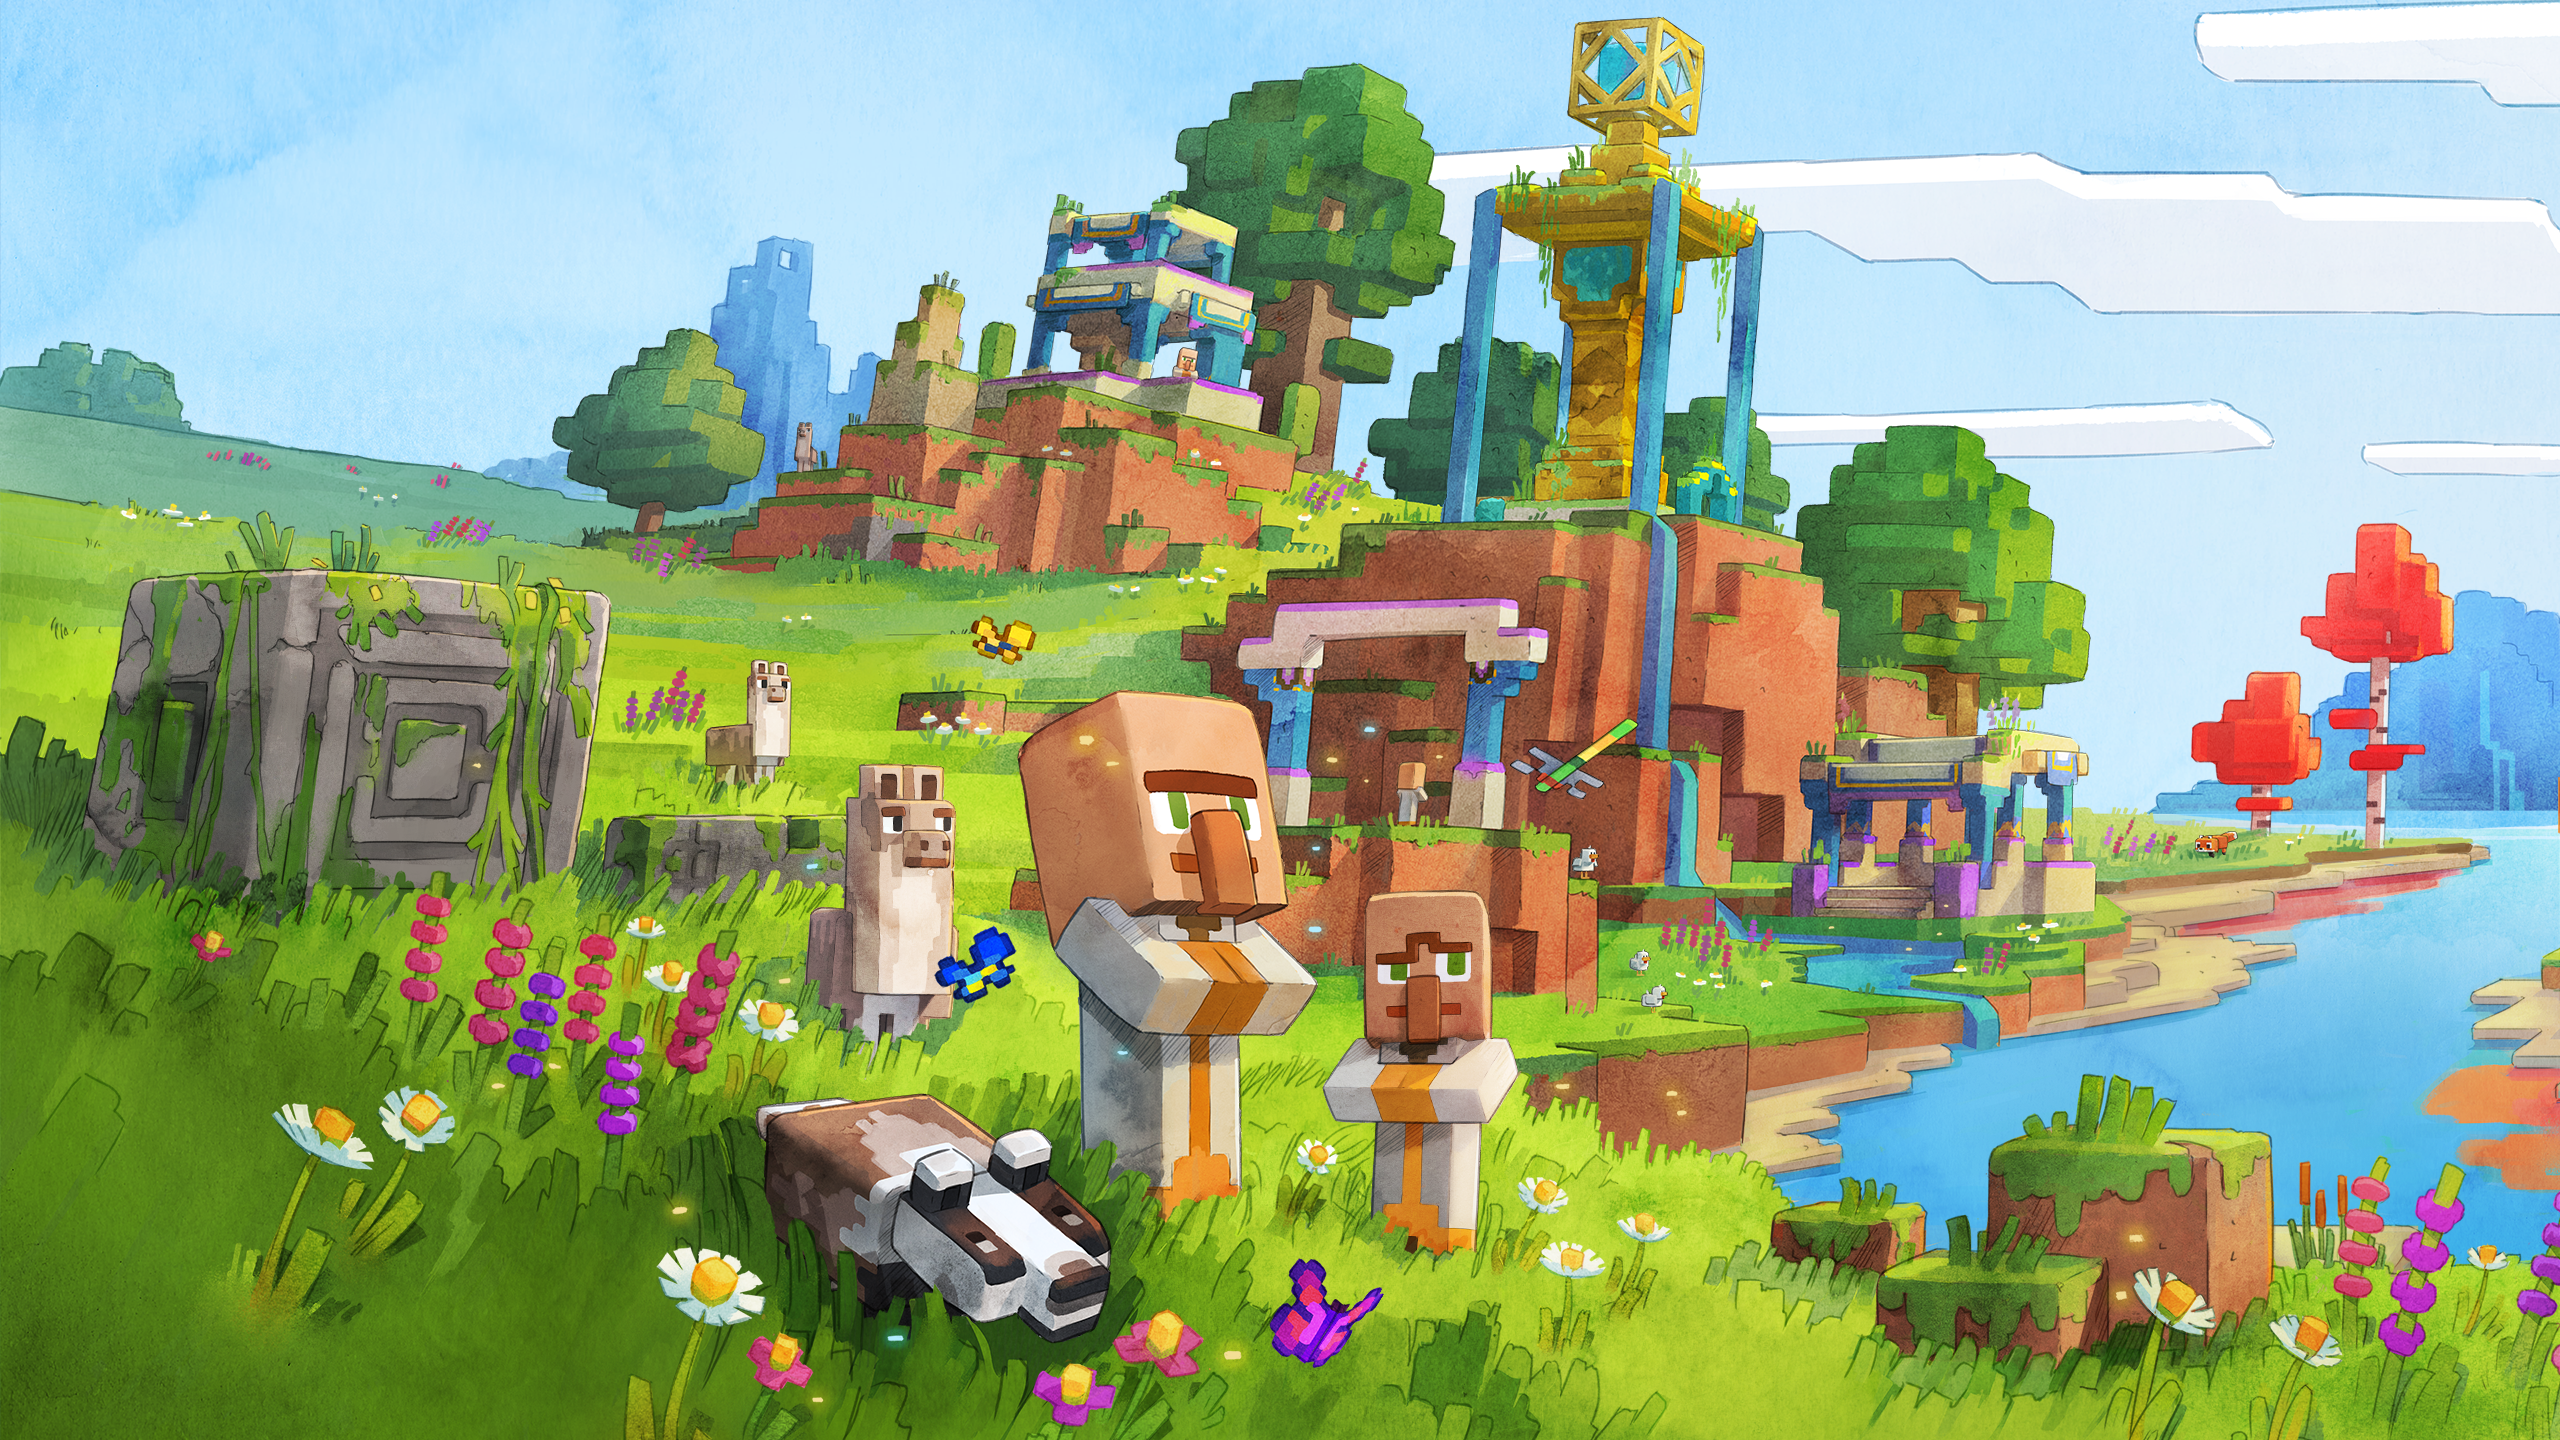 HD Minecraft Legends wallpaper featuring colorful landscape with game characters and structures for desktop background.